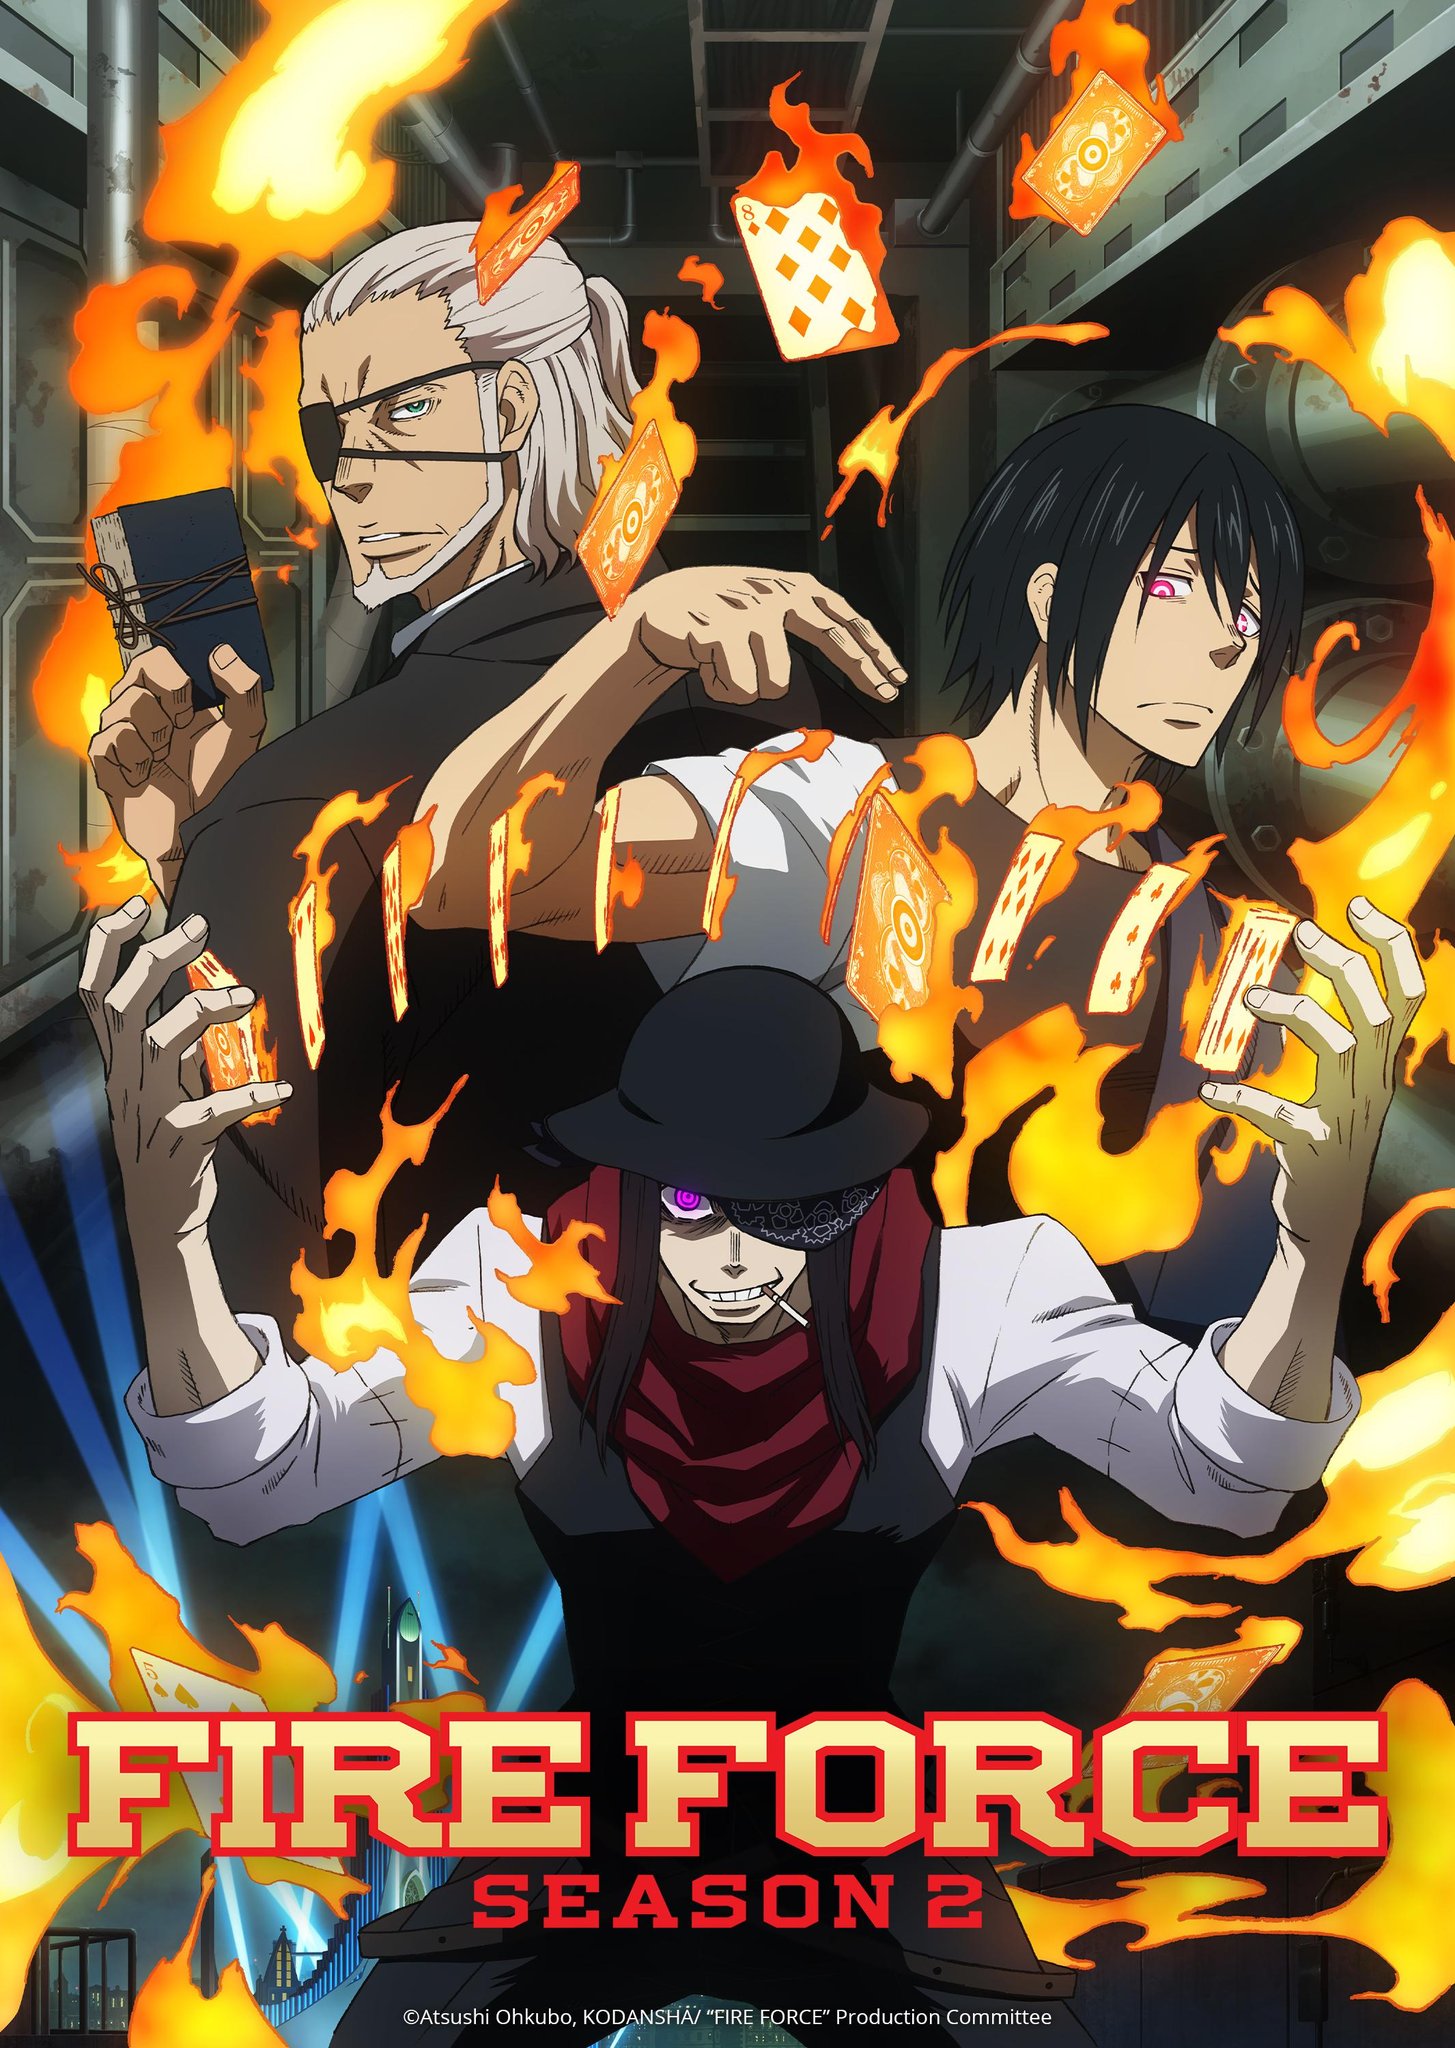 Anime News And Facts on X: Fire Force Season 2 New Key Visual for